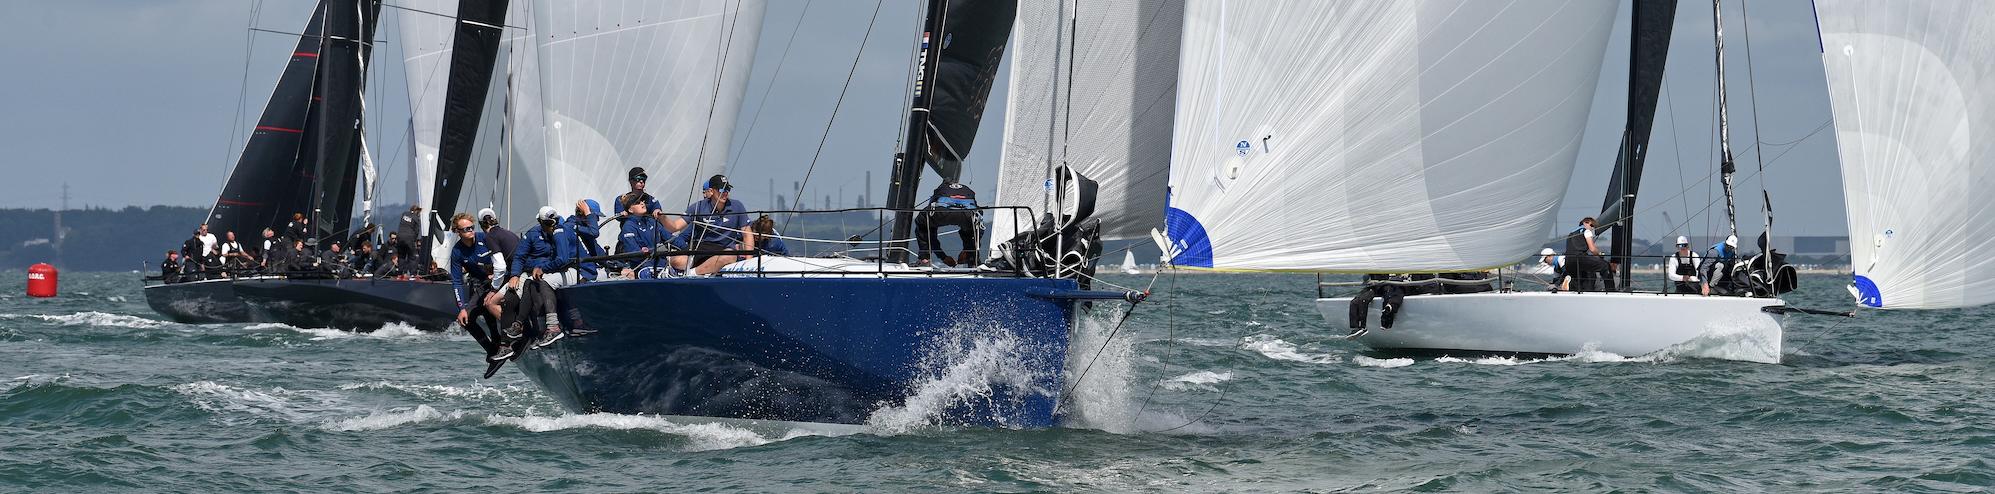 The Royal Ocean Racing Club (RORC) has received expressions of interest from all over the world to compete in the 2025 Admiral’s Cup. The latest development is the organisation of the Admiral’s Cup 2025 Advisory Committee.